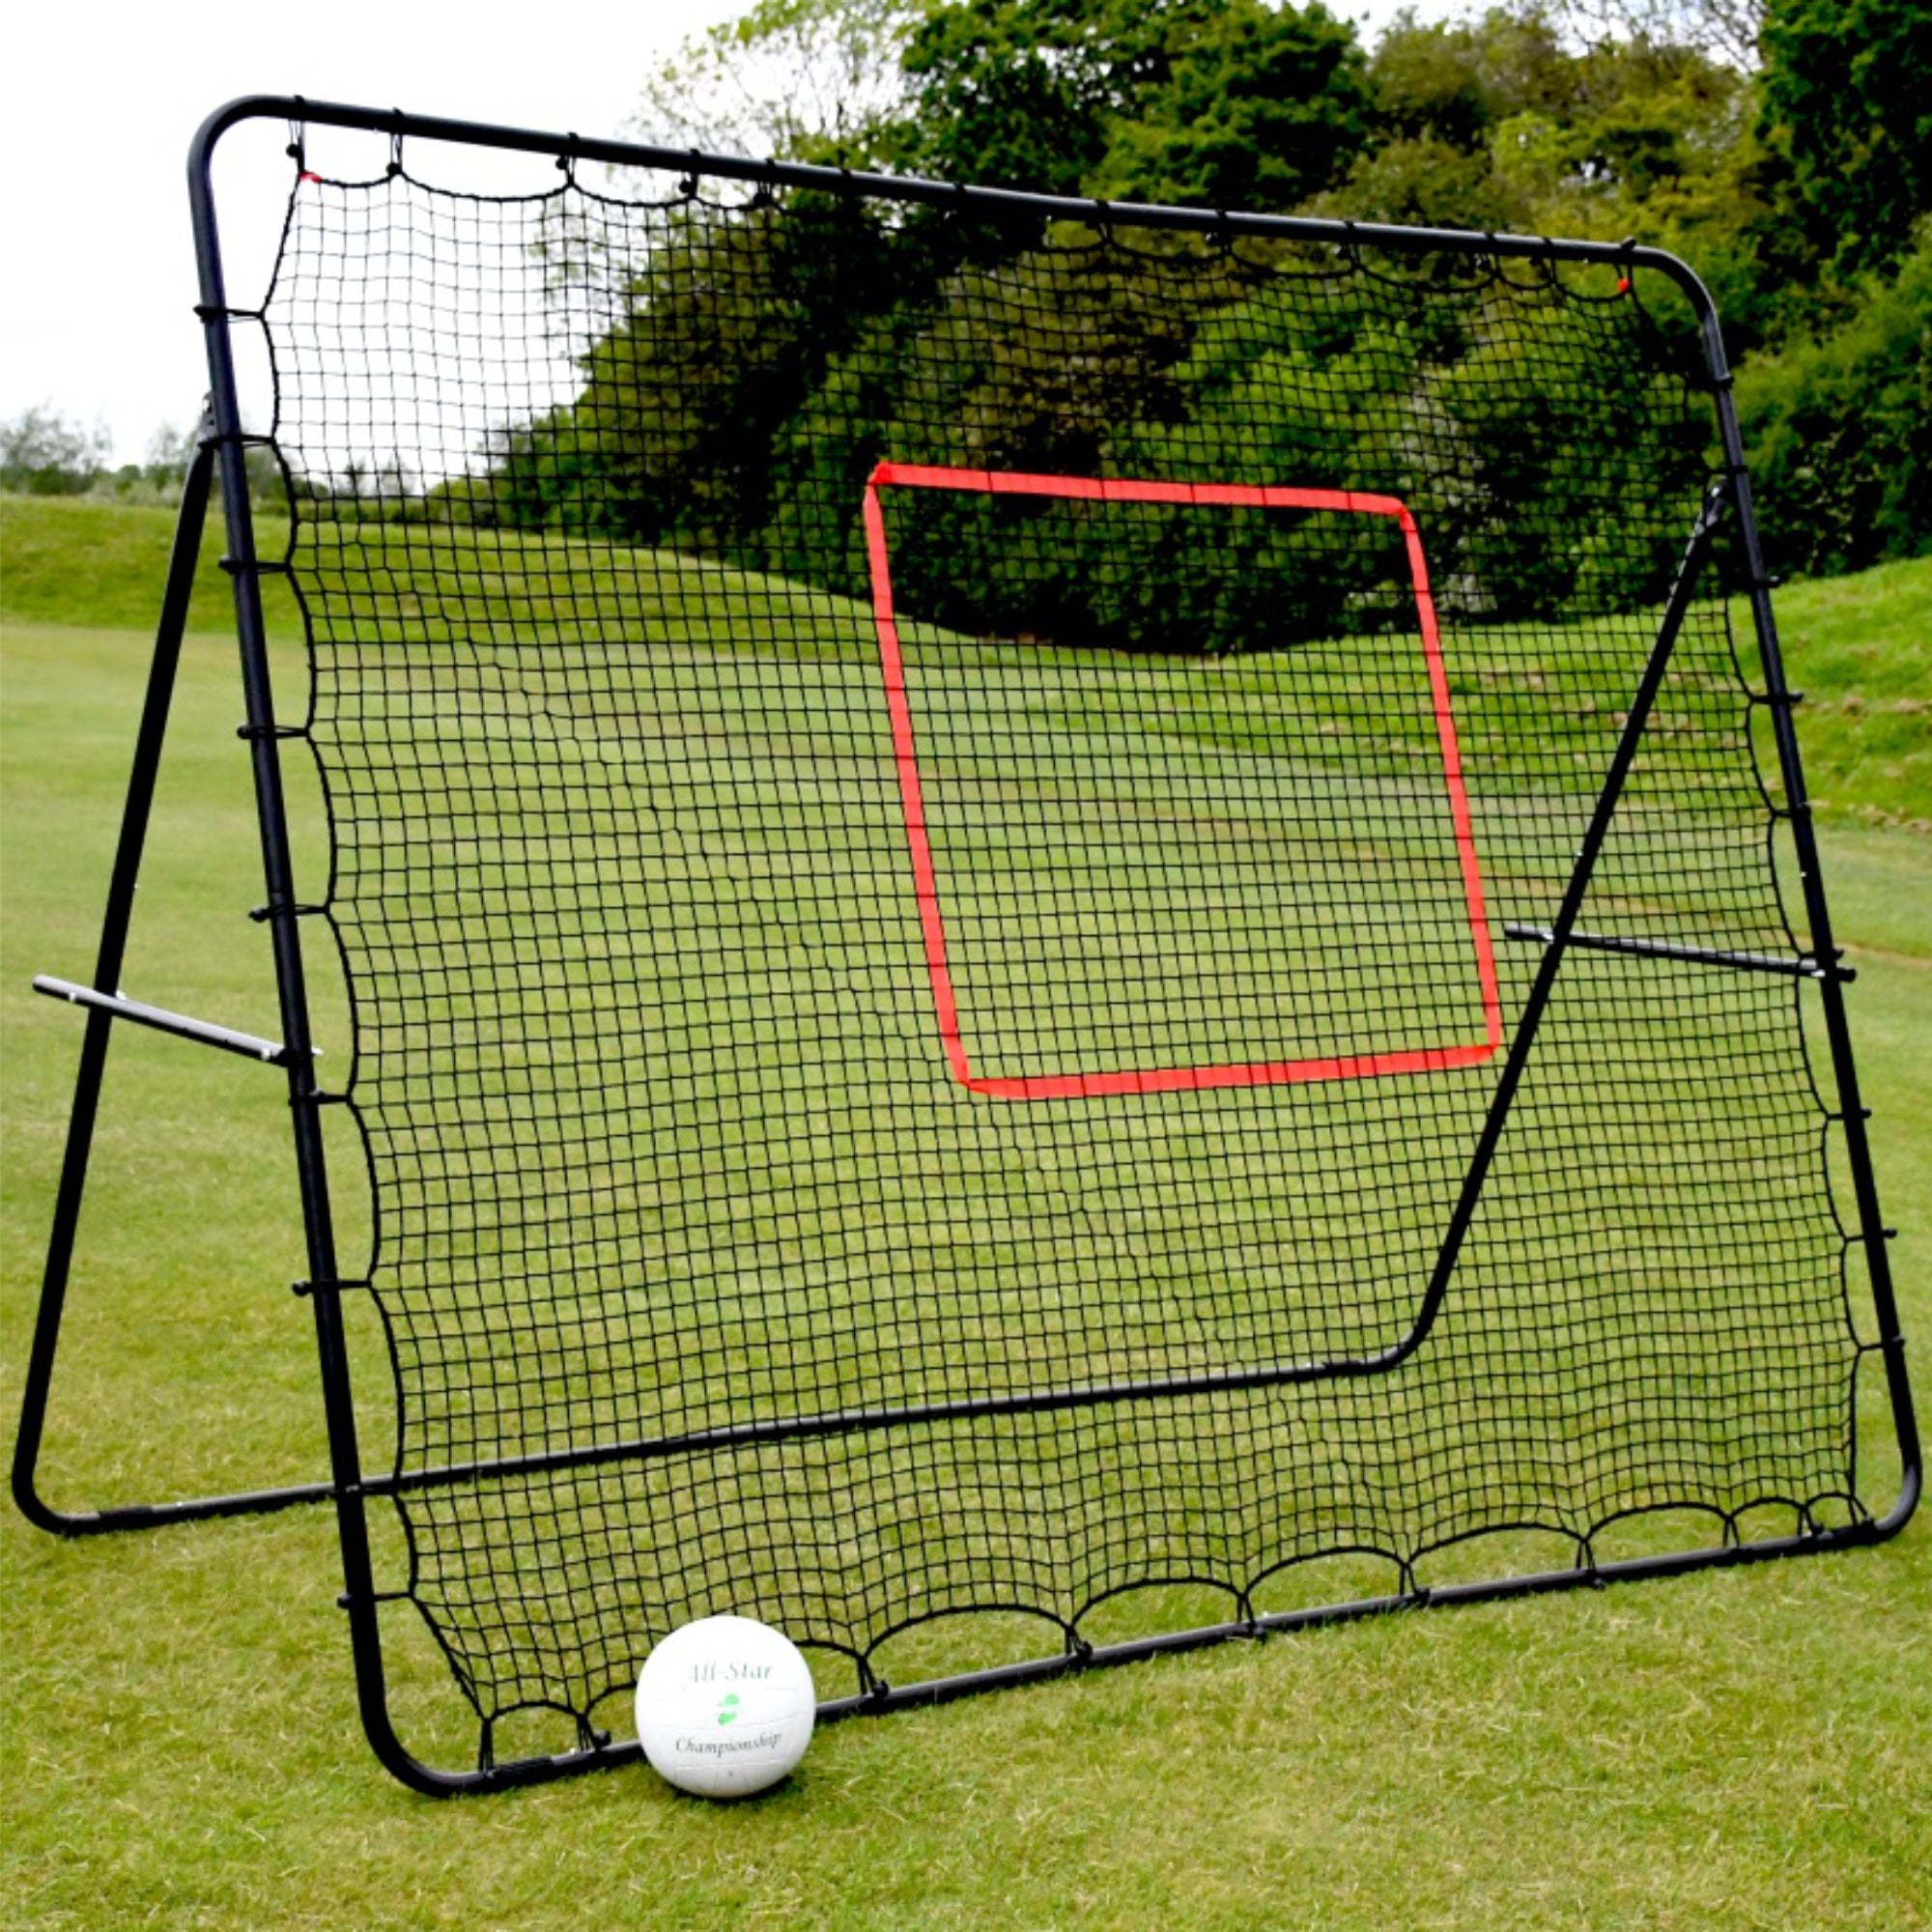 Black steel frame large rebounder with red taped target zone in middle